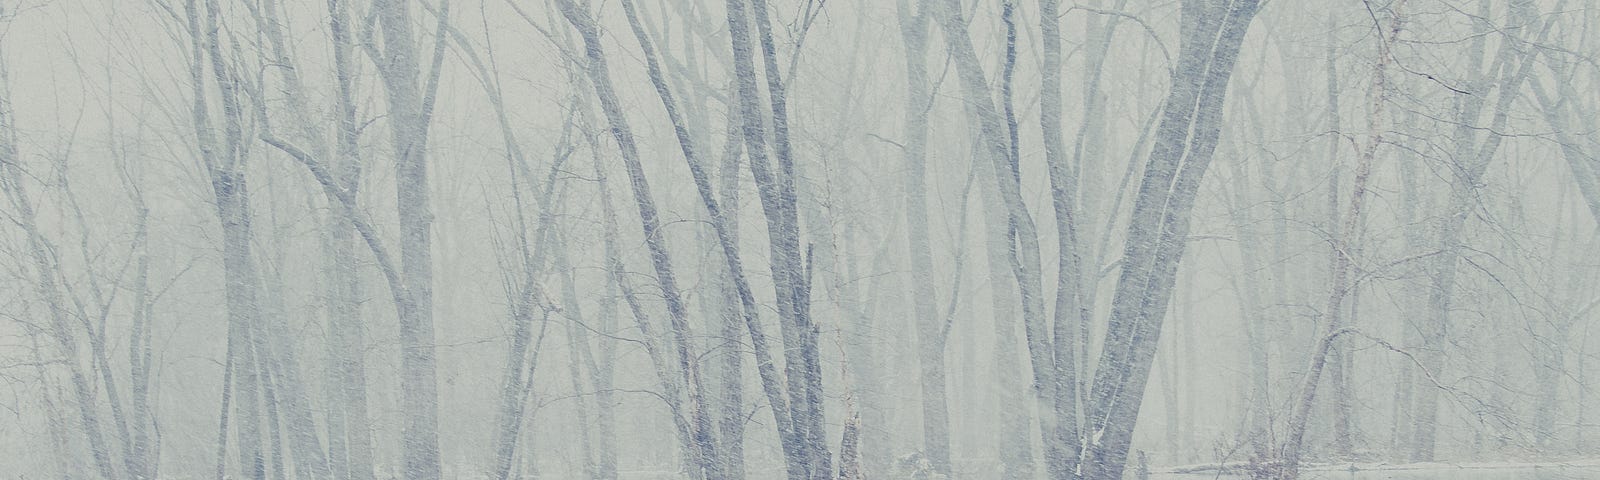 A hazy picture snapped in the middle of a snowstorm. Naked trees pierce upwards from small islands in a lake, their reflections creating a rippling and unsteady mirror image. The entire scene is made muddled and unsettling by blowing snow, distorting the viewer’s sight.